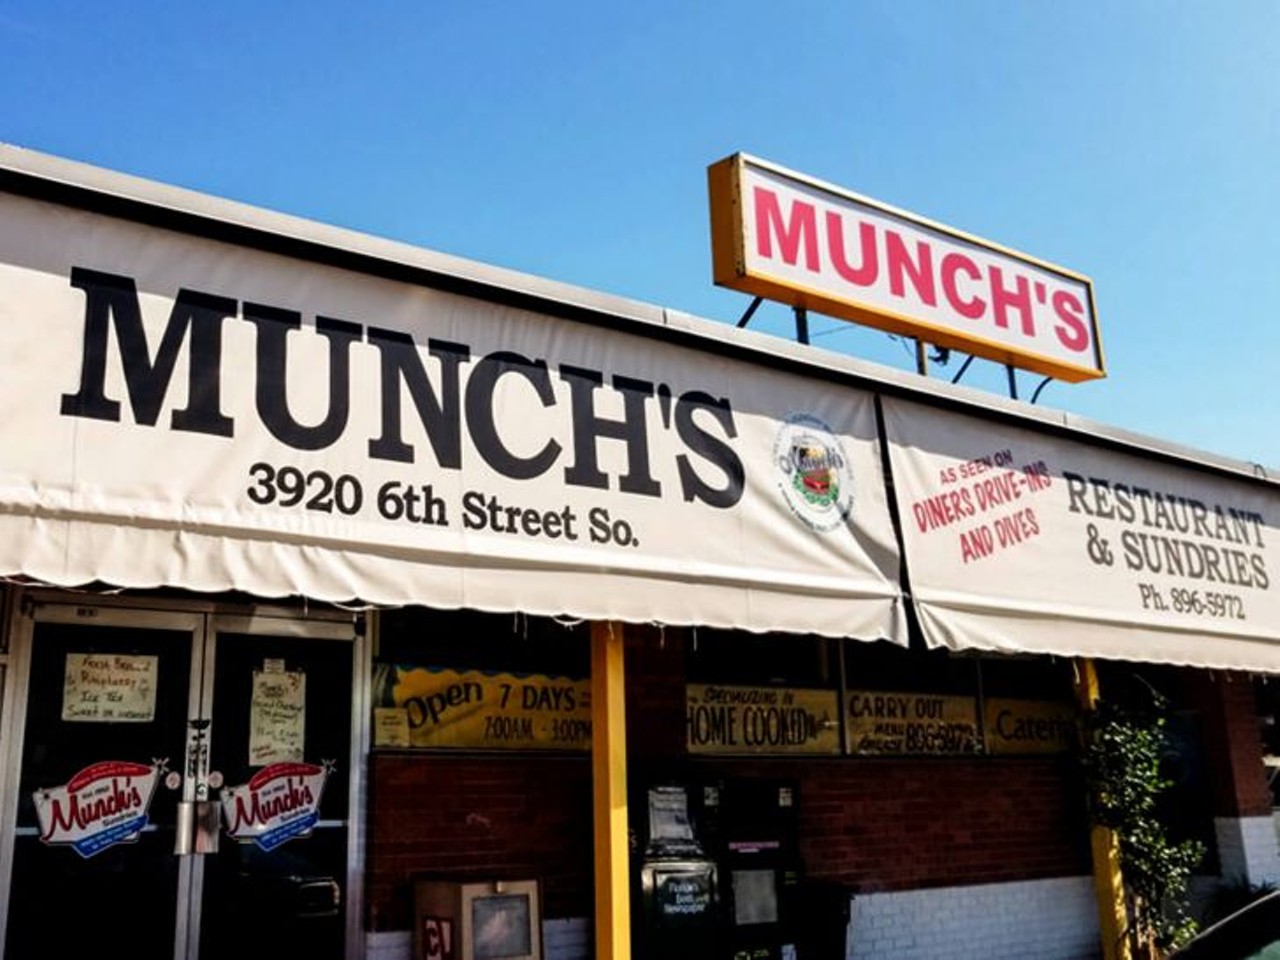 Munch's Restaurant & Sundries 
3920 6th St. S., St. Petersburg
Since making an appearance on Guy&#146;s Triple D, Munch&#146;s has added a world map for out-of-towners who follow the show to mark where they&#146;re from. The restaurant, which started as a sundry store and post office, specializes in creamed chipped beef.
Photo via Munch's Restaurant & Sundries&#146; website